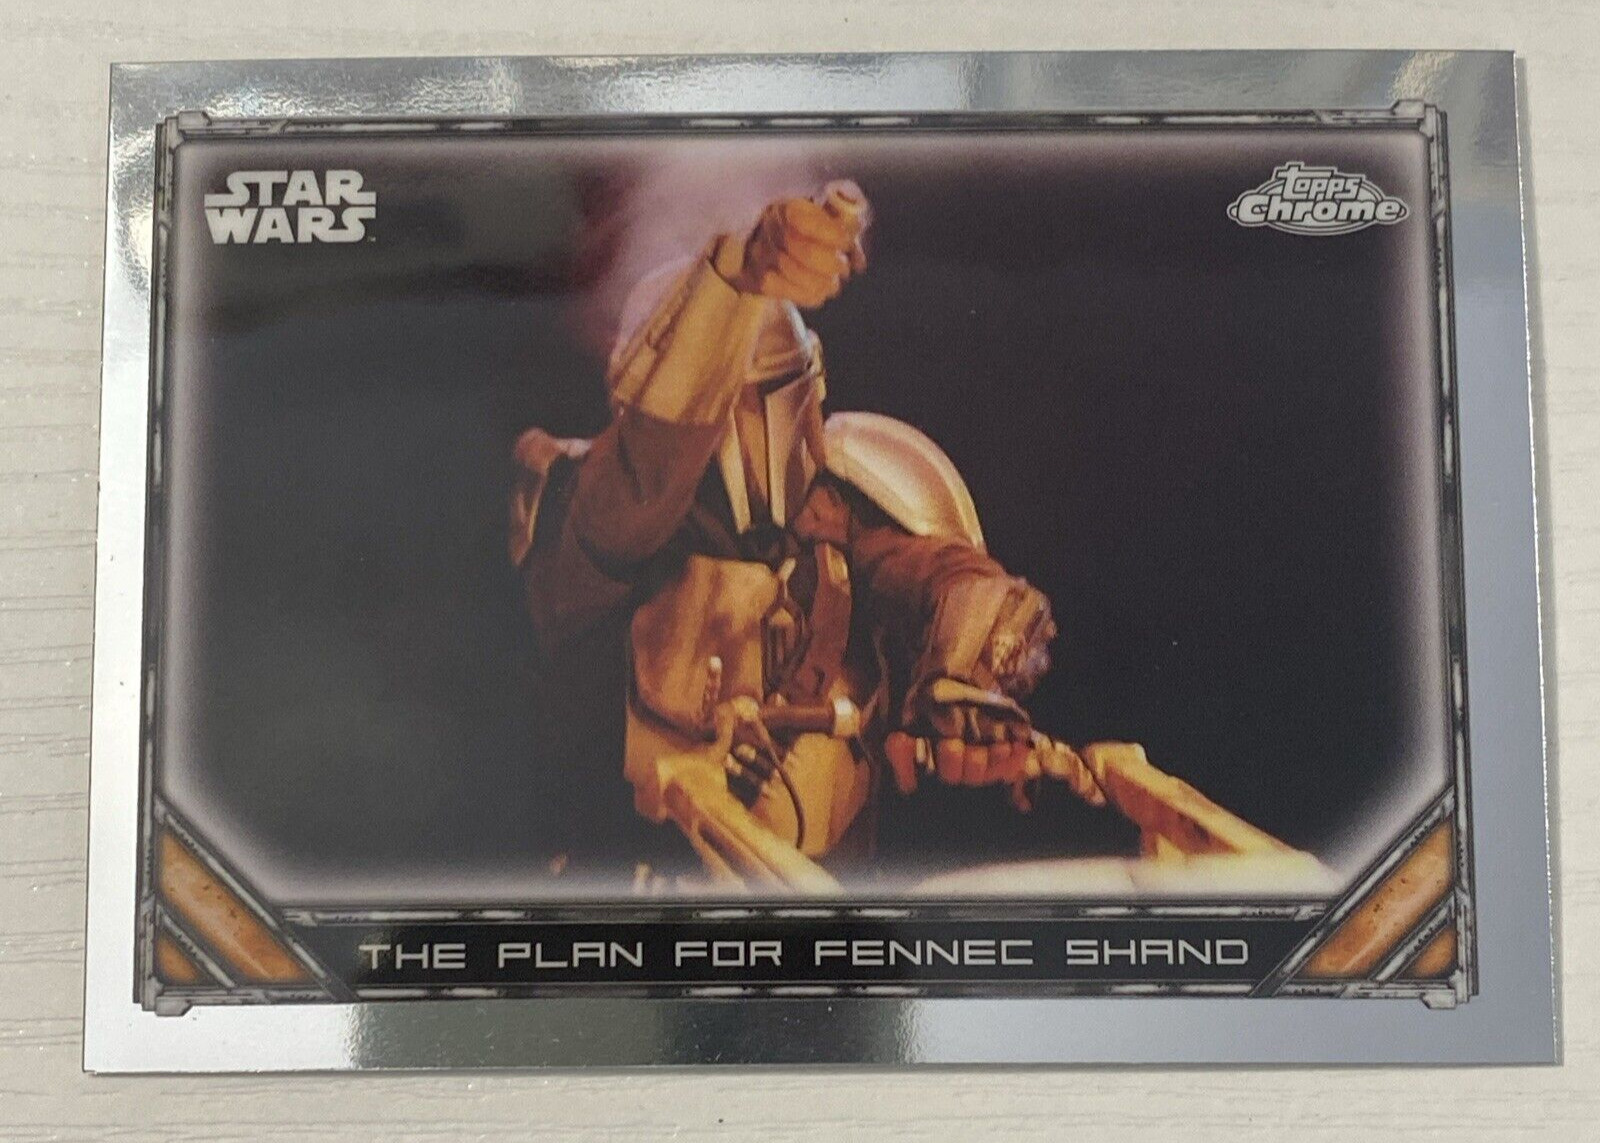 Topps Chrome Star Wars The Mandalorian Base Card S1-29 THE PLAN FOR FENNEC SHAND